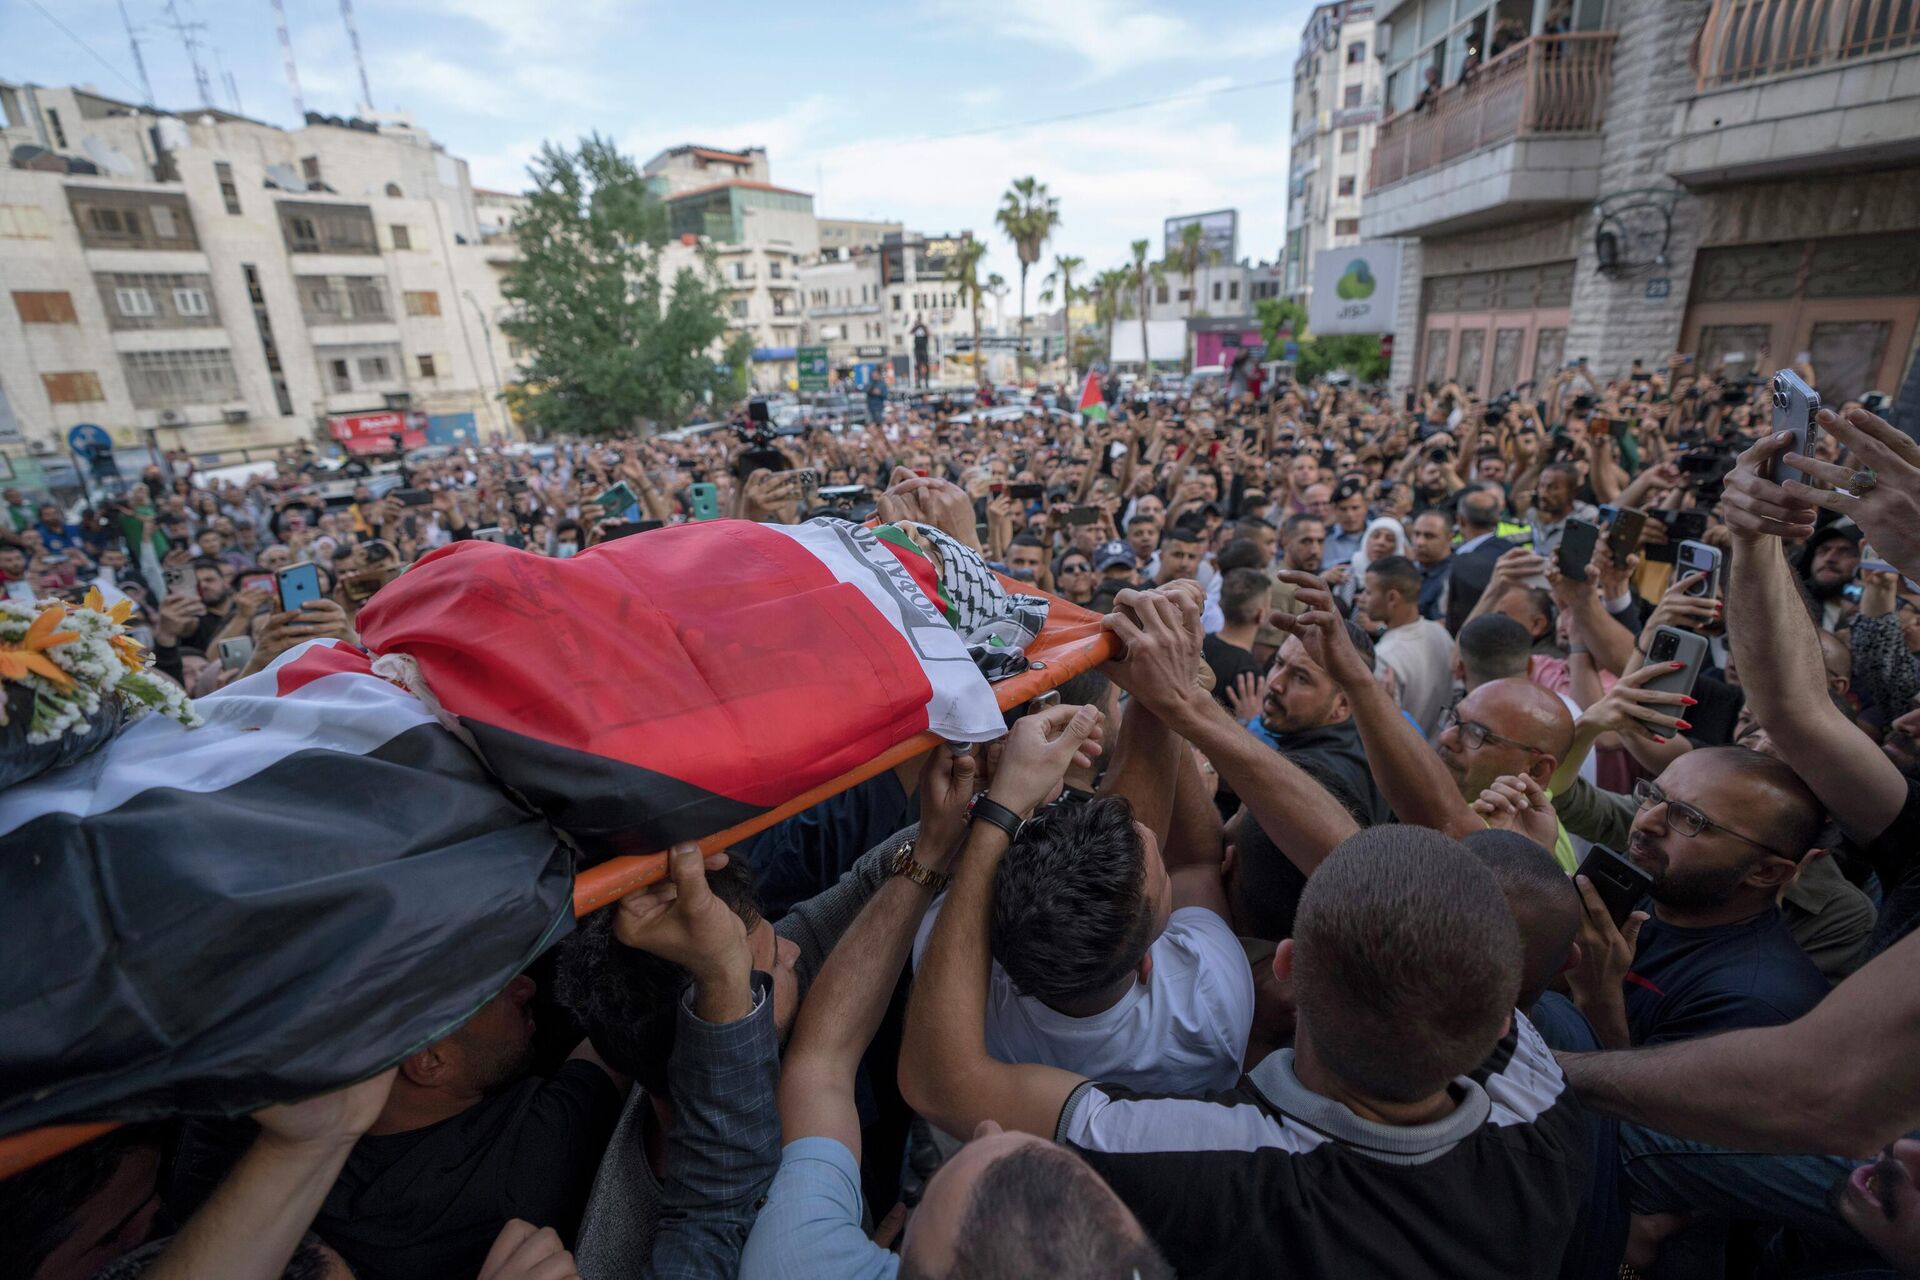 Palestinian mourners carry the body of Shireen Abu Akleh out of the office of Al Jazeera after friends and colleagues paid their respects, in the West Bank city of Ramallah, Wednesday, May 11, 2022.  - Sputnik International, 1920, 11.05.2022